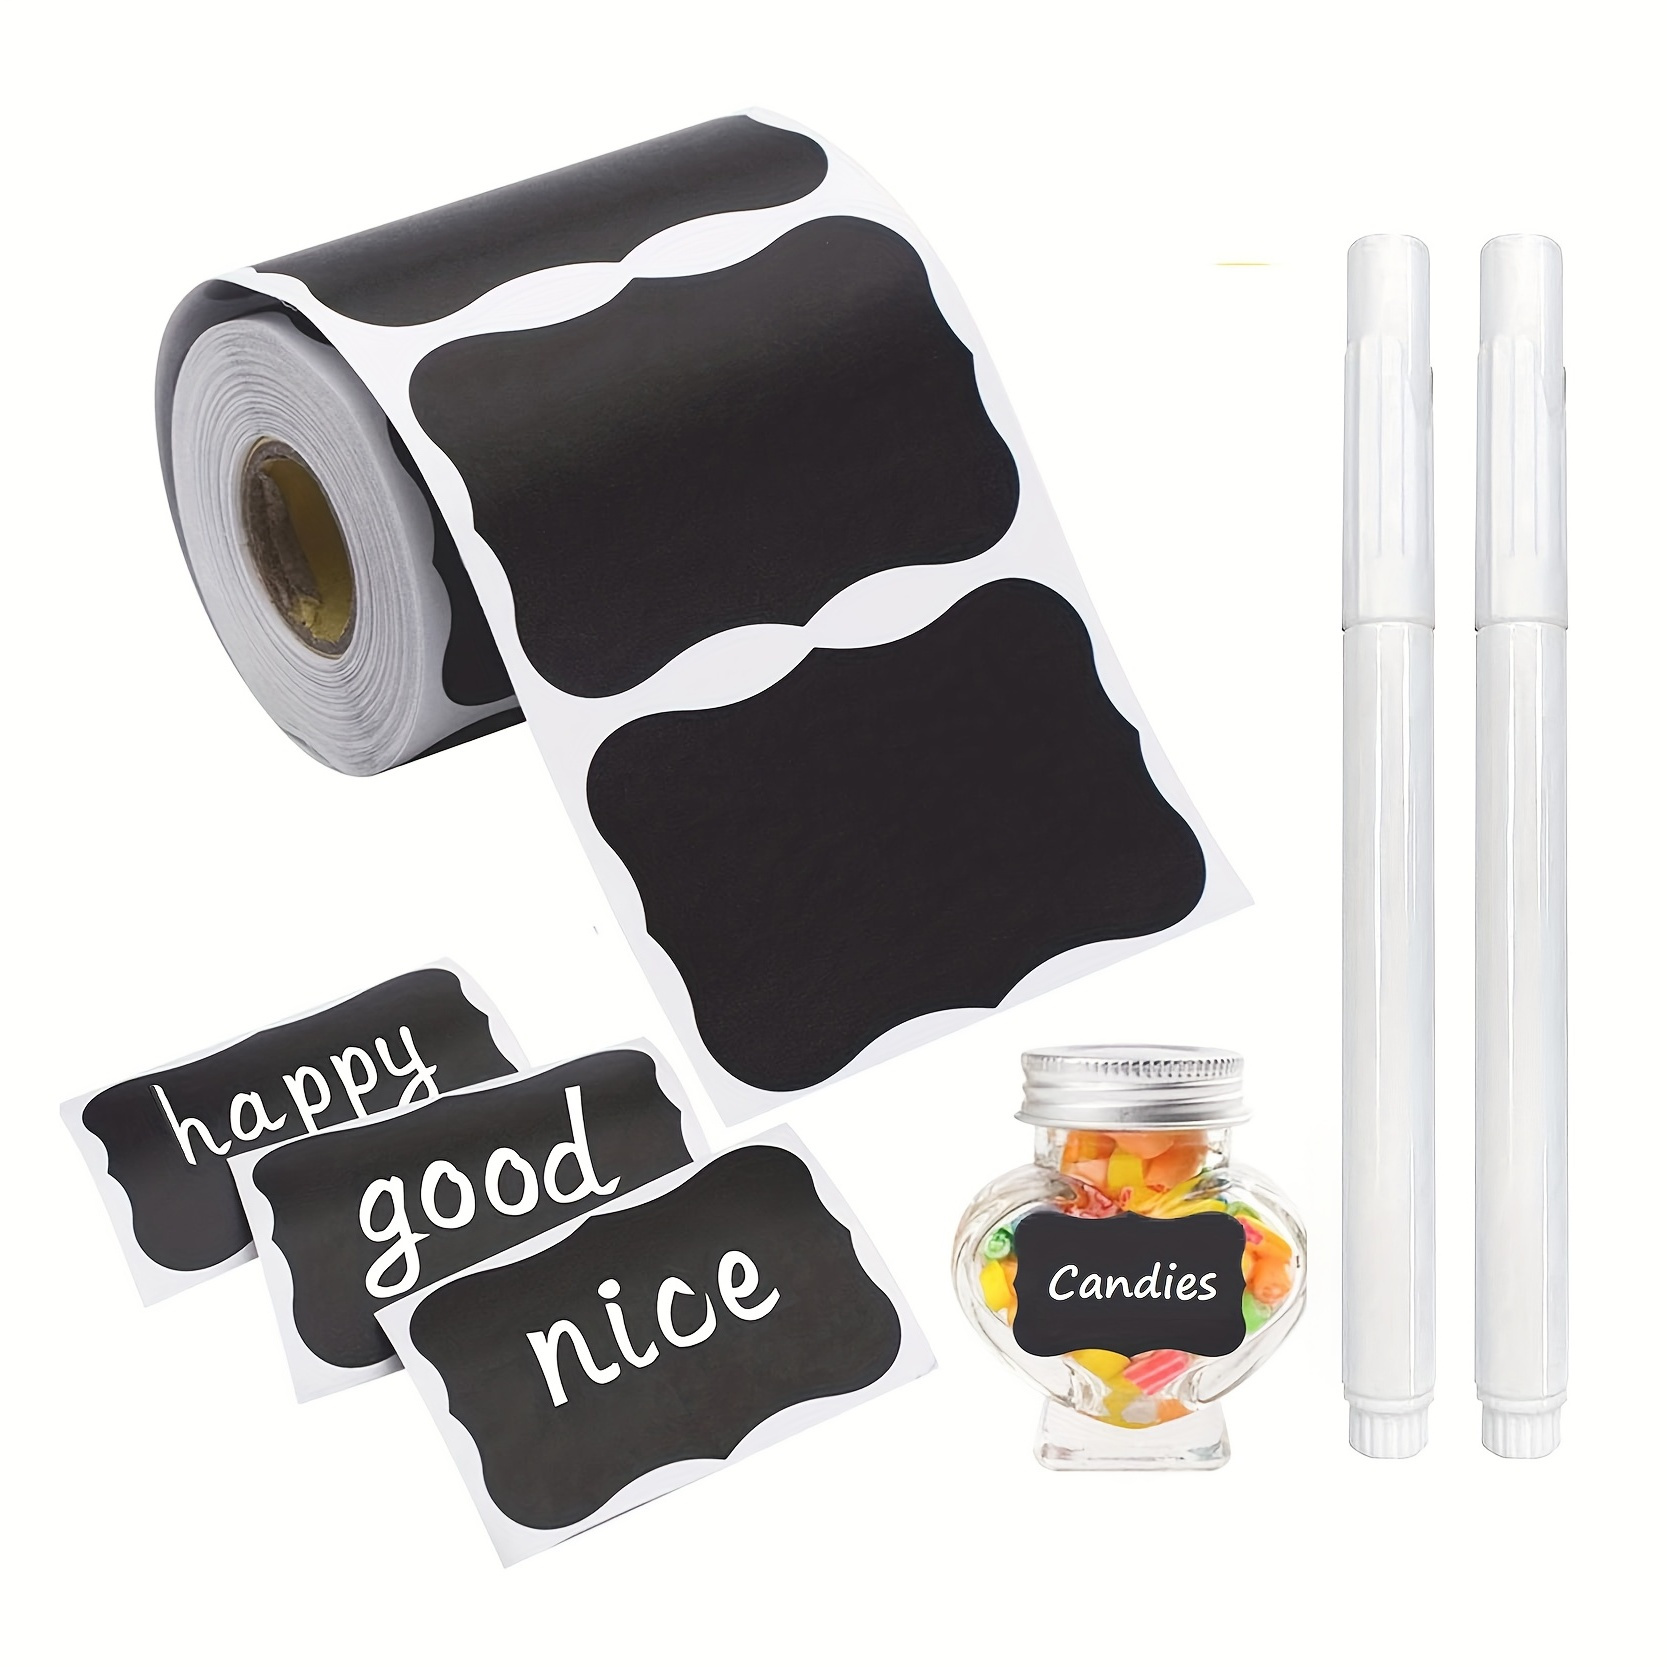 

120pcs Black Labels Waterproof Reusable Chalkboard Stickers With 2 Liquid Note Pens For Party Decoration, Craft Room, Wedding, Storage, Organize Your Home, Kitchen And Office